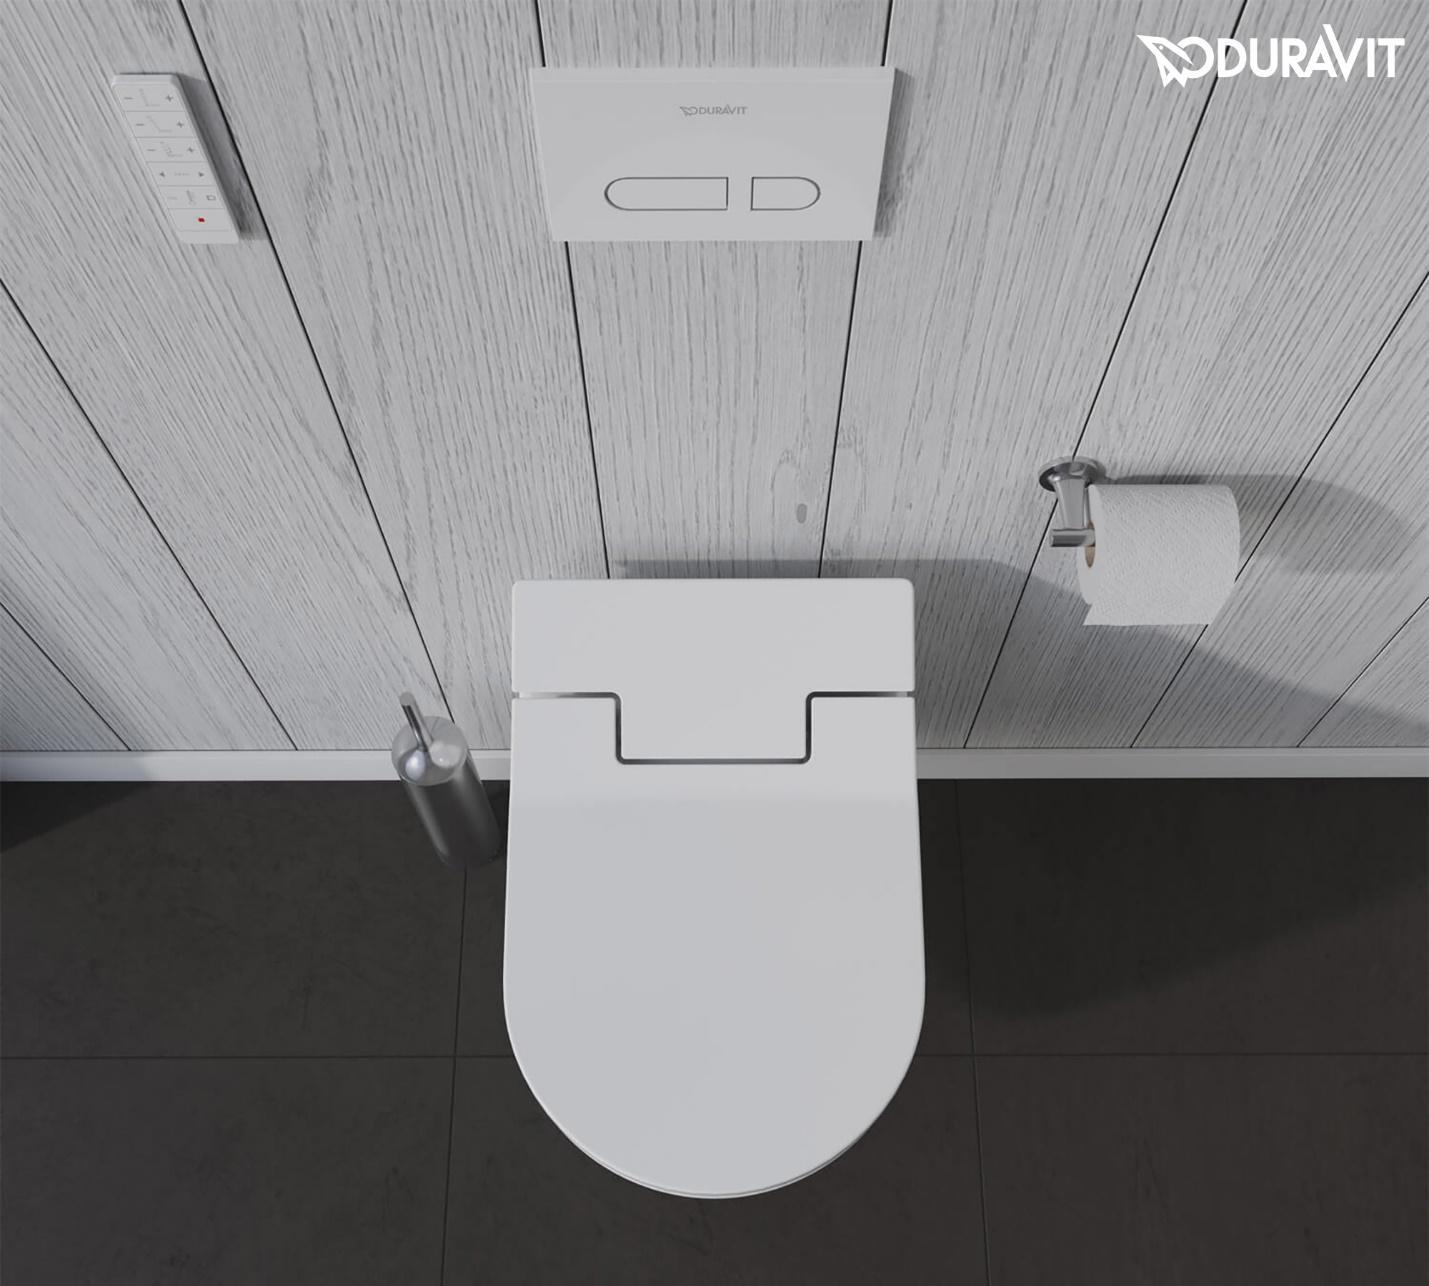 A toilet in a bathroom

Description automatically generated with medium confidence